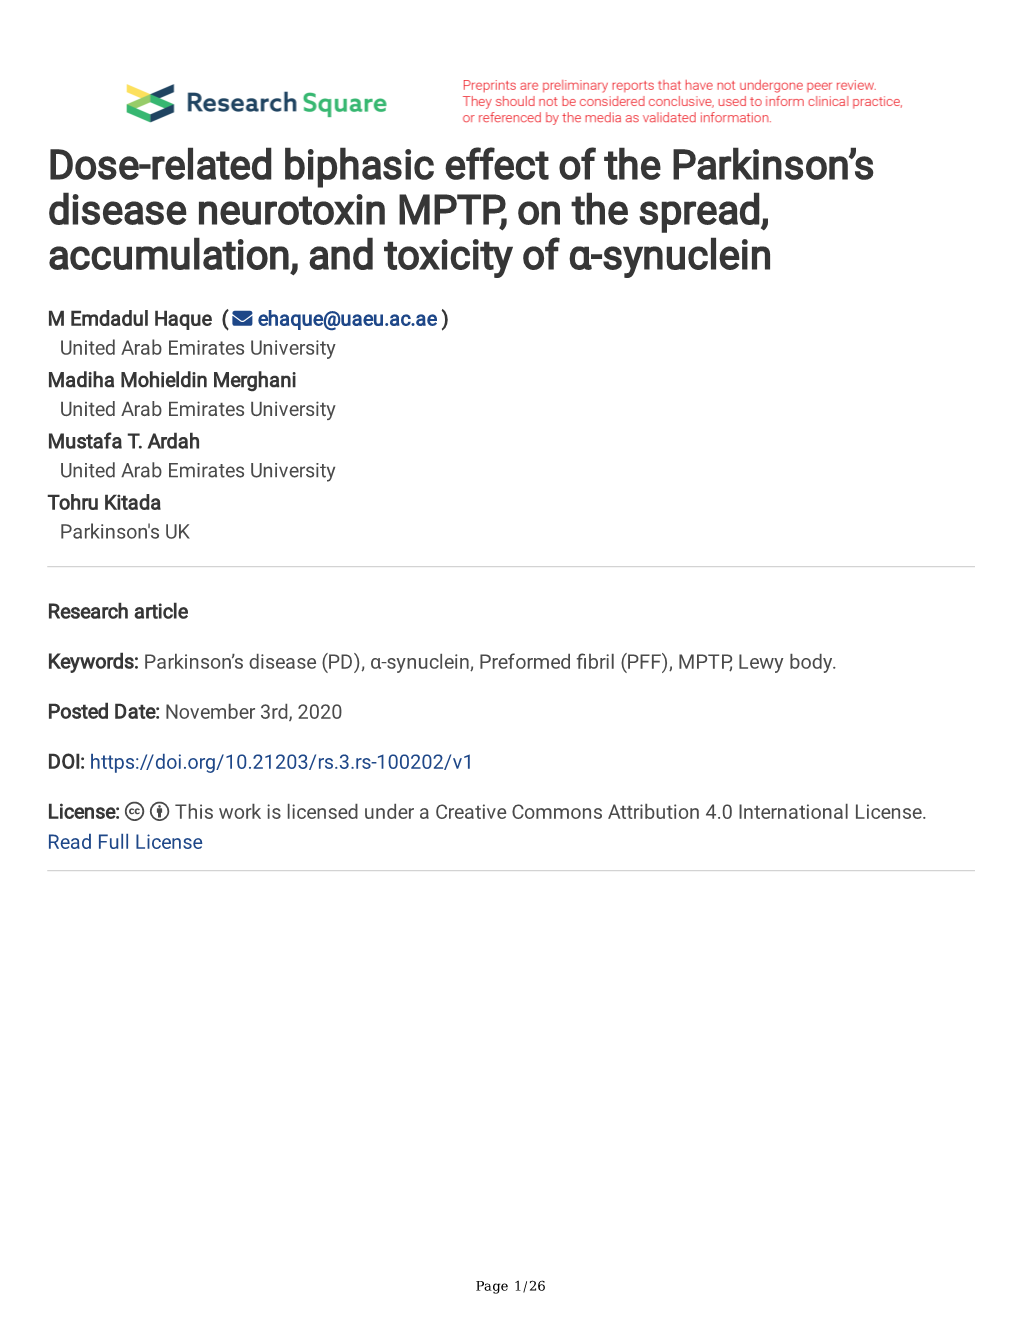 Dose-Related Biphasic Effect of the Parkinson's Disease Neurotoxin MPTP, on the Spread, Accumulation, and Toxicity of Α-Synuc